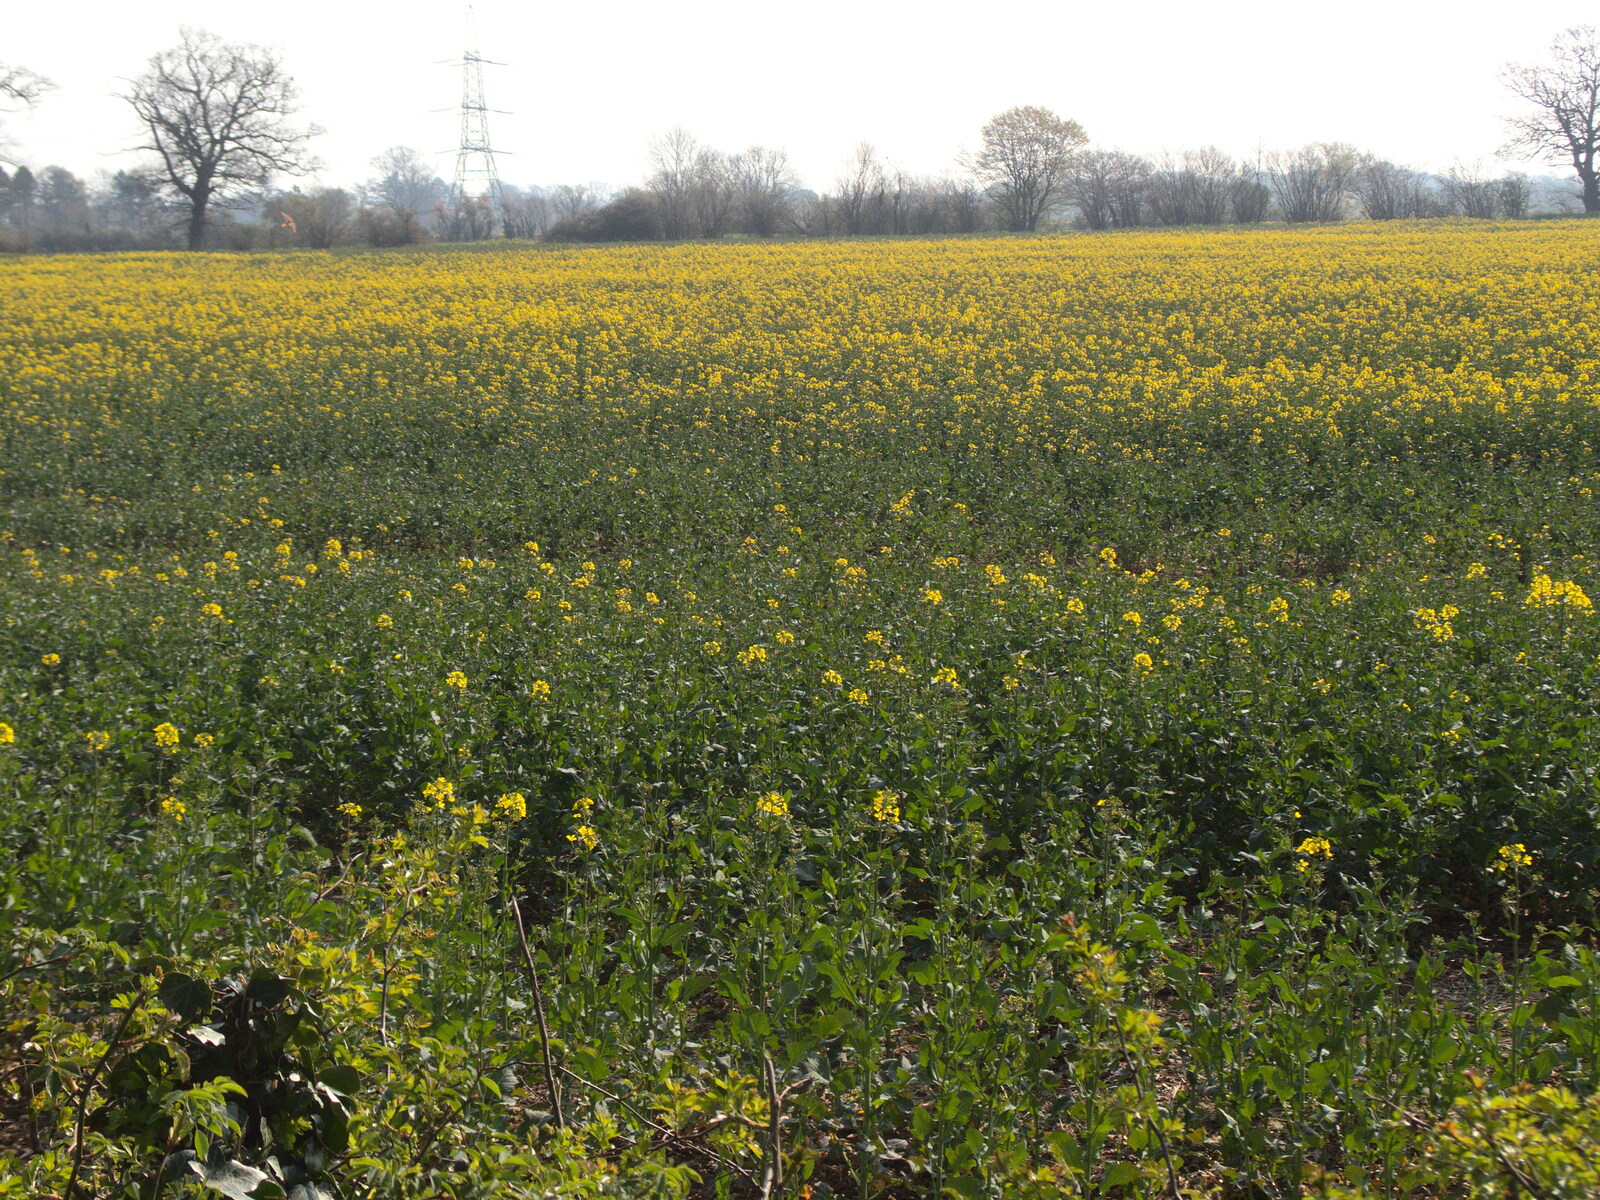 A field of oilseed in flower from BSCC Beer Garden Hypothermia, Hoxne and Brome, Suffolk - 22nd April 2021